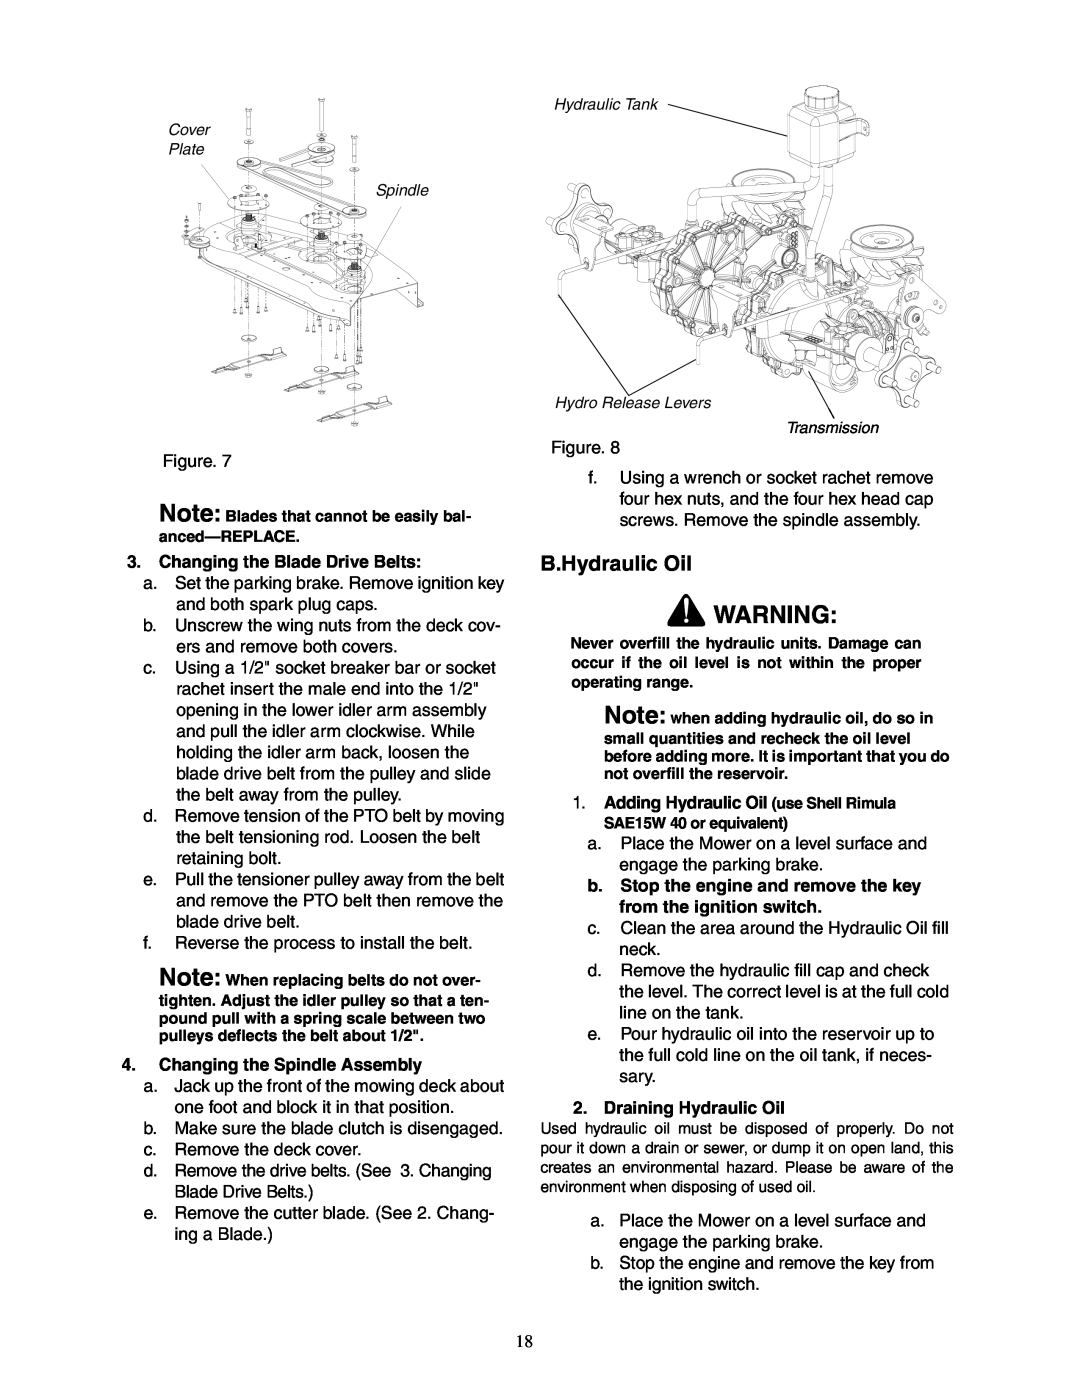 Cub Cadet 23HP Z-Force 60 service manual B.Hydraulic Oil, Changing the Blade Drive Belts, Changing the Spindle Assembly 